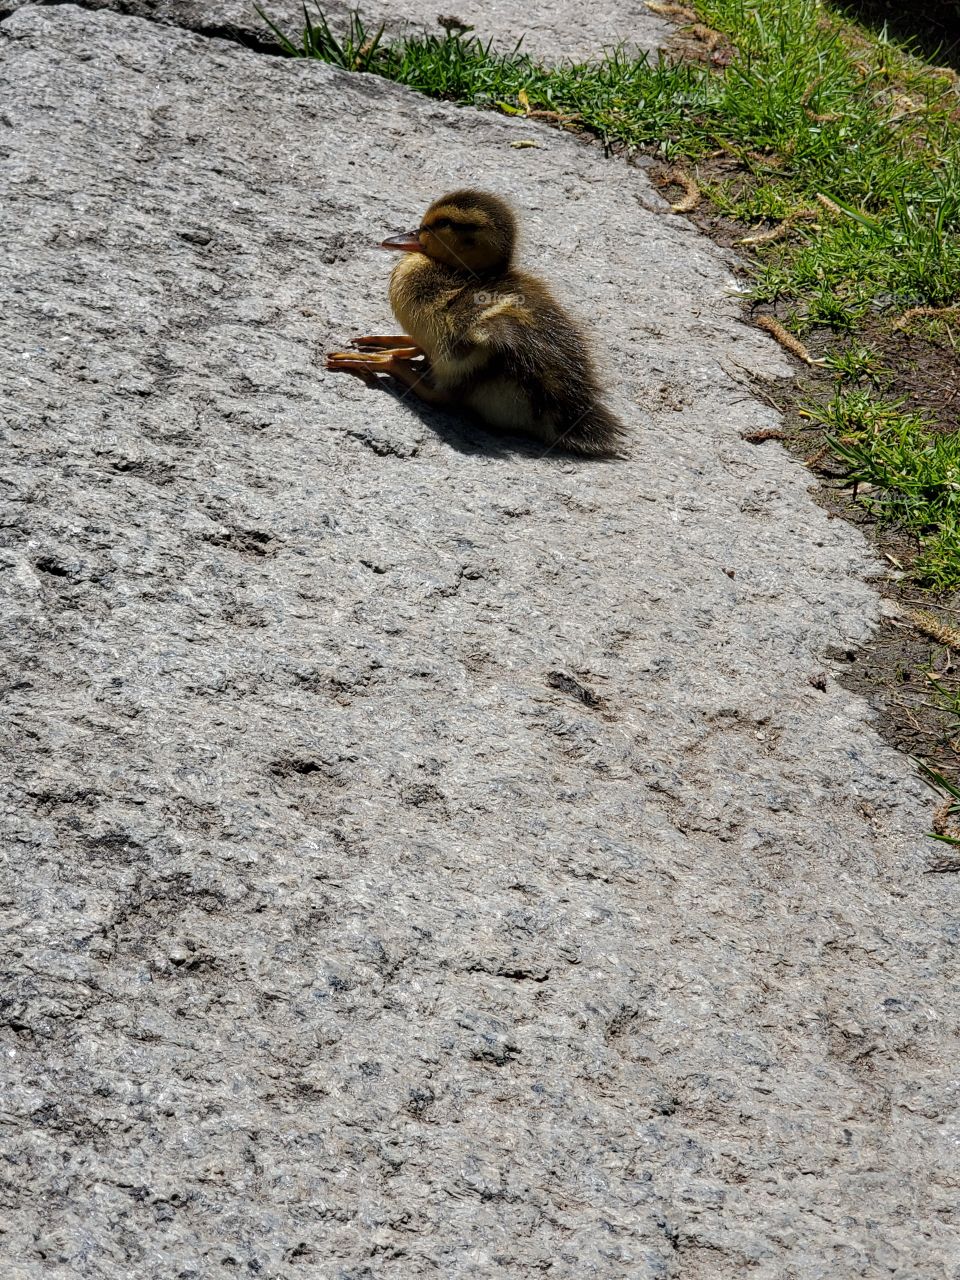 A duckling takes a rest after a long swim.